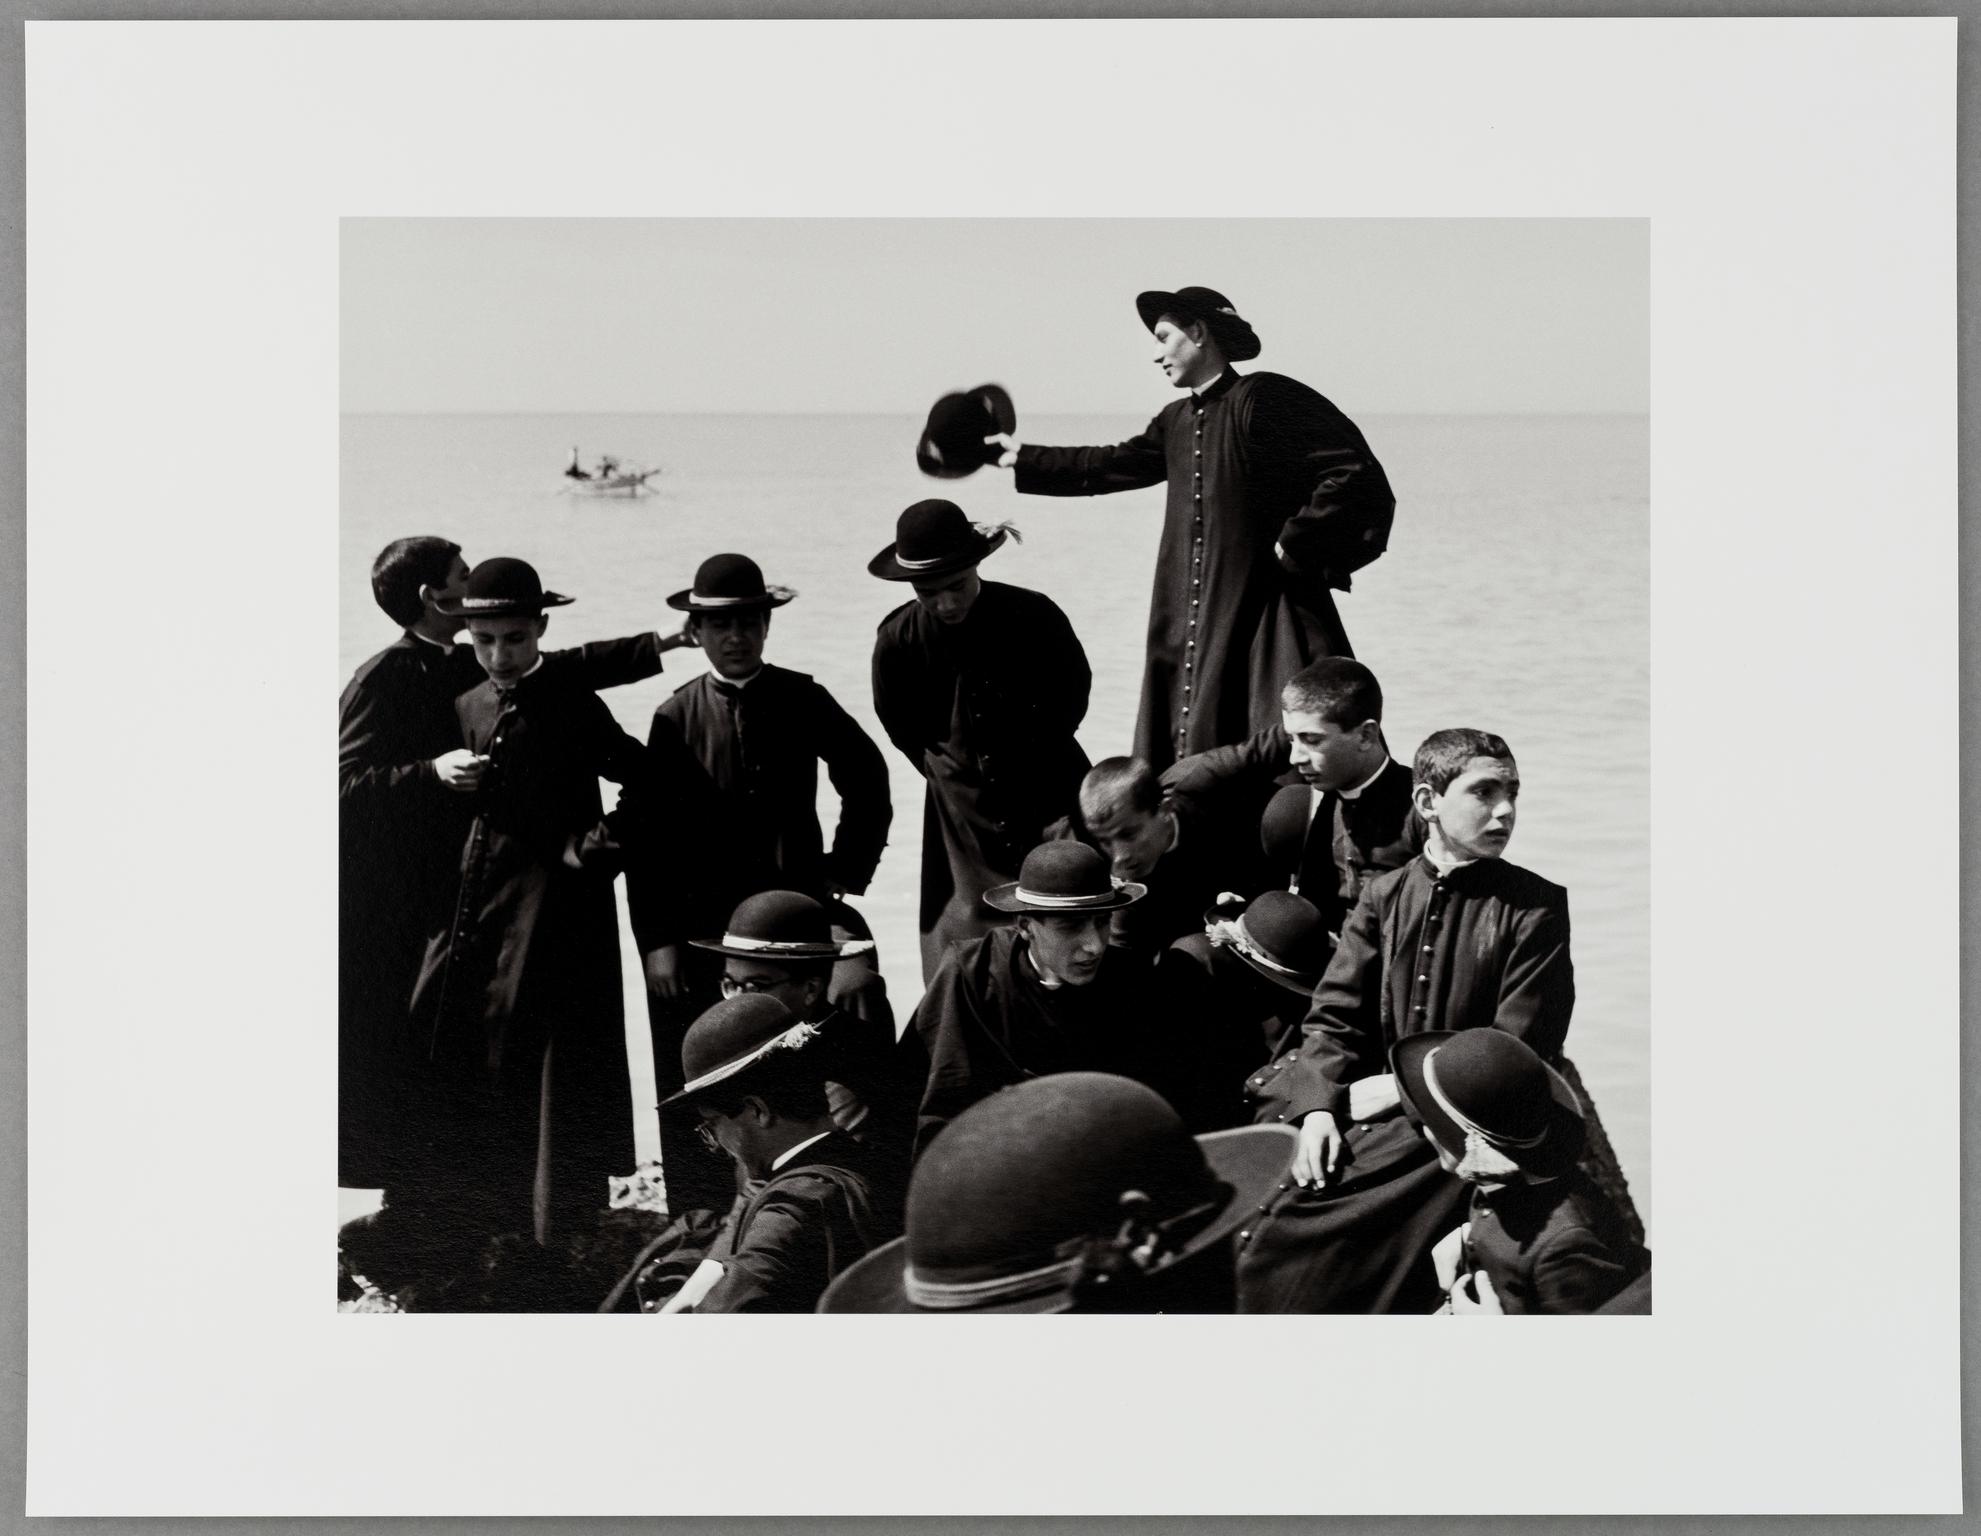 Seminarists by the sea, Naples